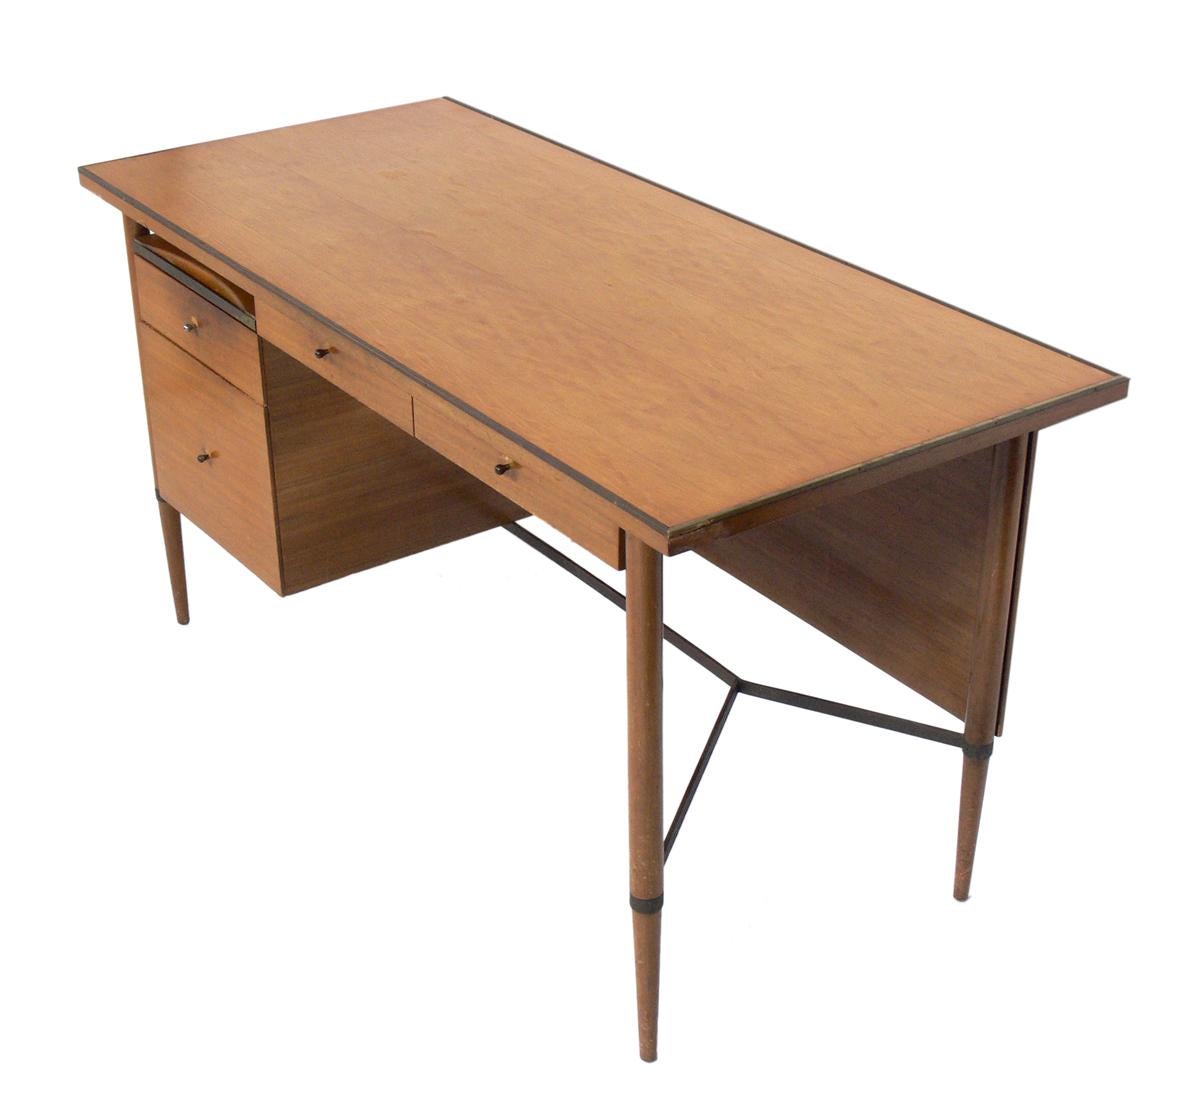 Clean lined modern desk, designed by Paul McCobb for The Connoisseur collection for H. Sacks, American, circa 1950s. This desk is currently being refinished and can be completed in your choice of finish color. The price noted includes refinishing in